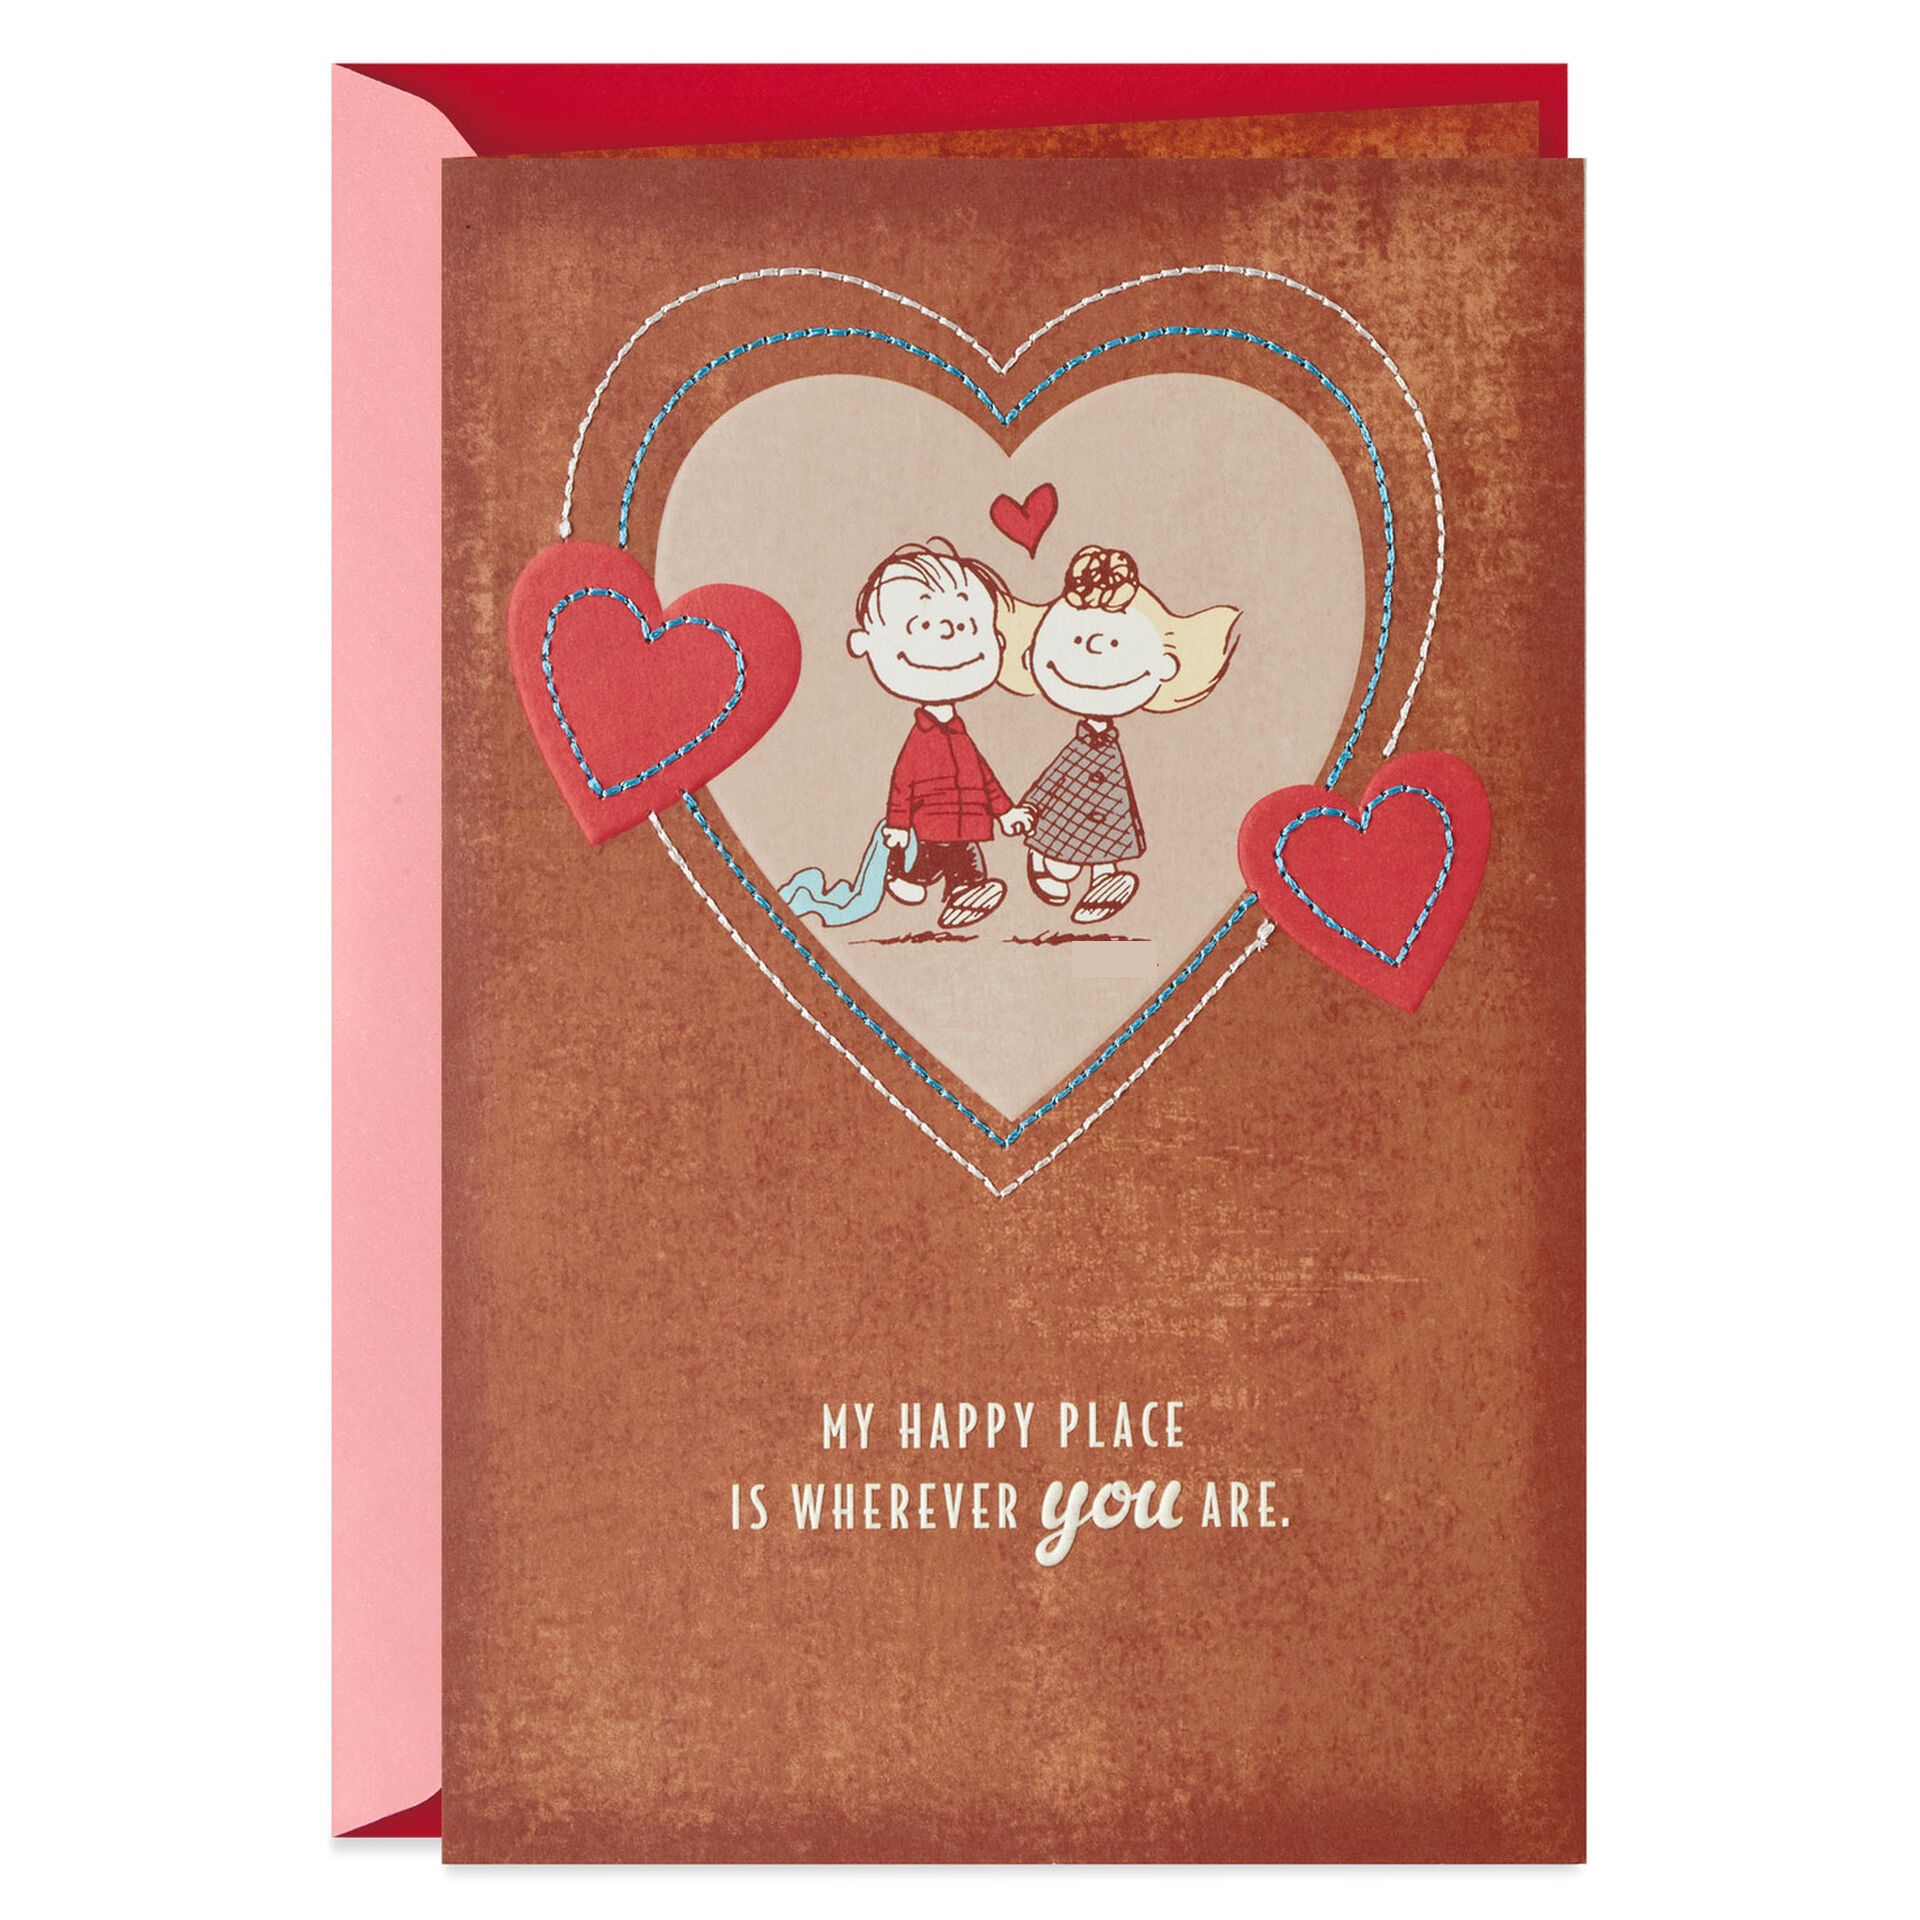 Peanuts-Linus-and-Sally-My-Happy-Place-Valentines-Day-Card_679VEE7885_01